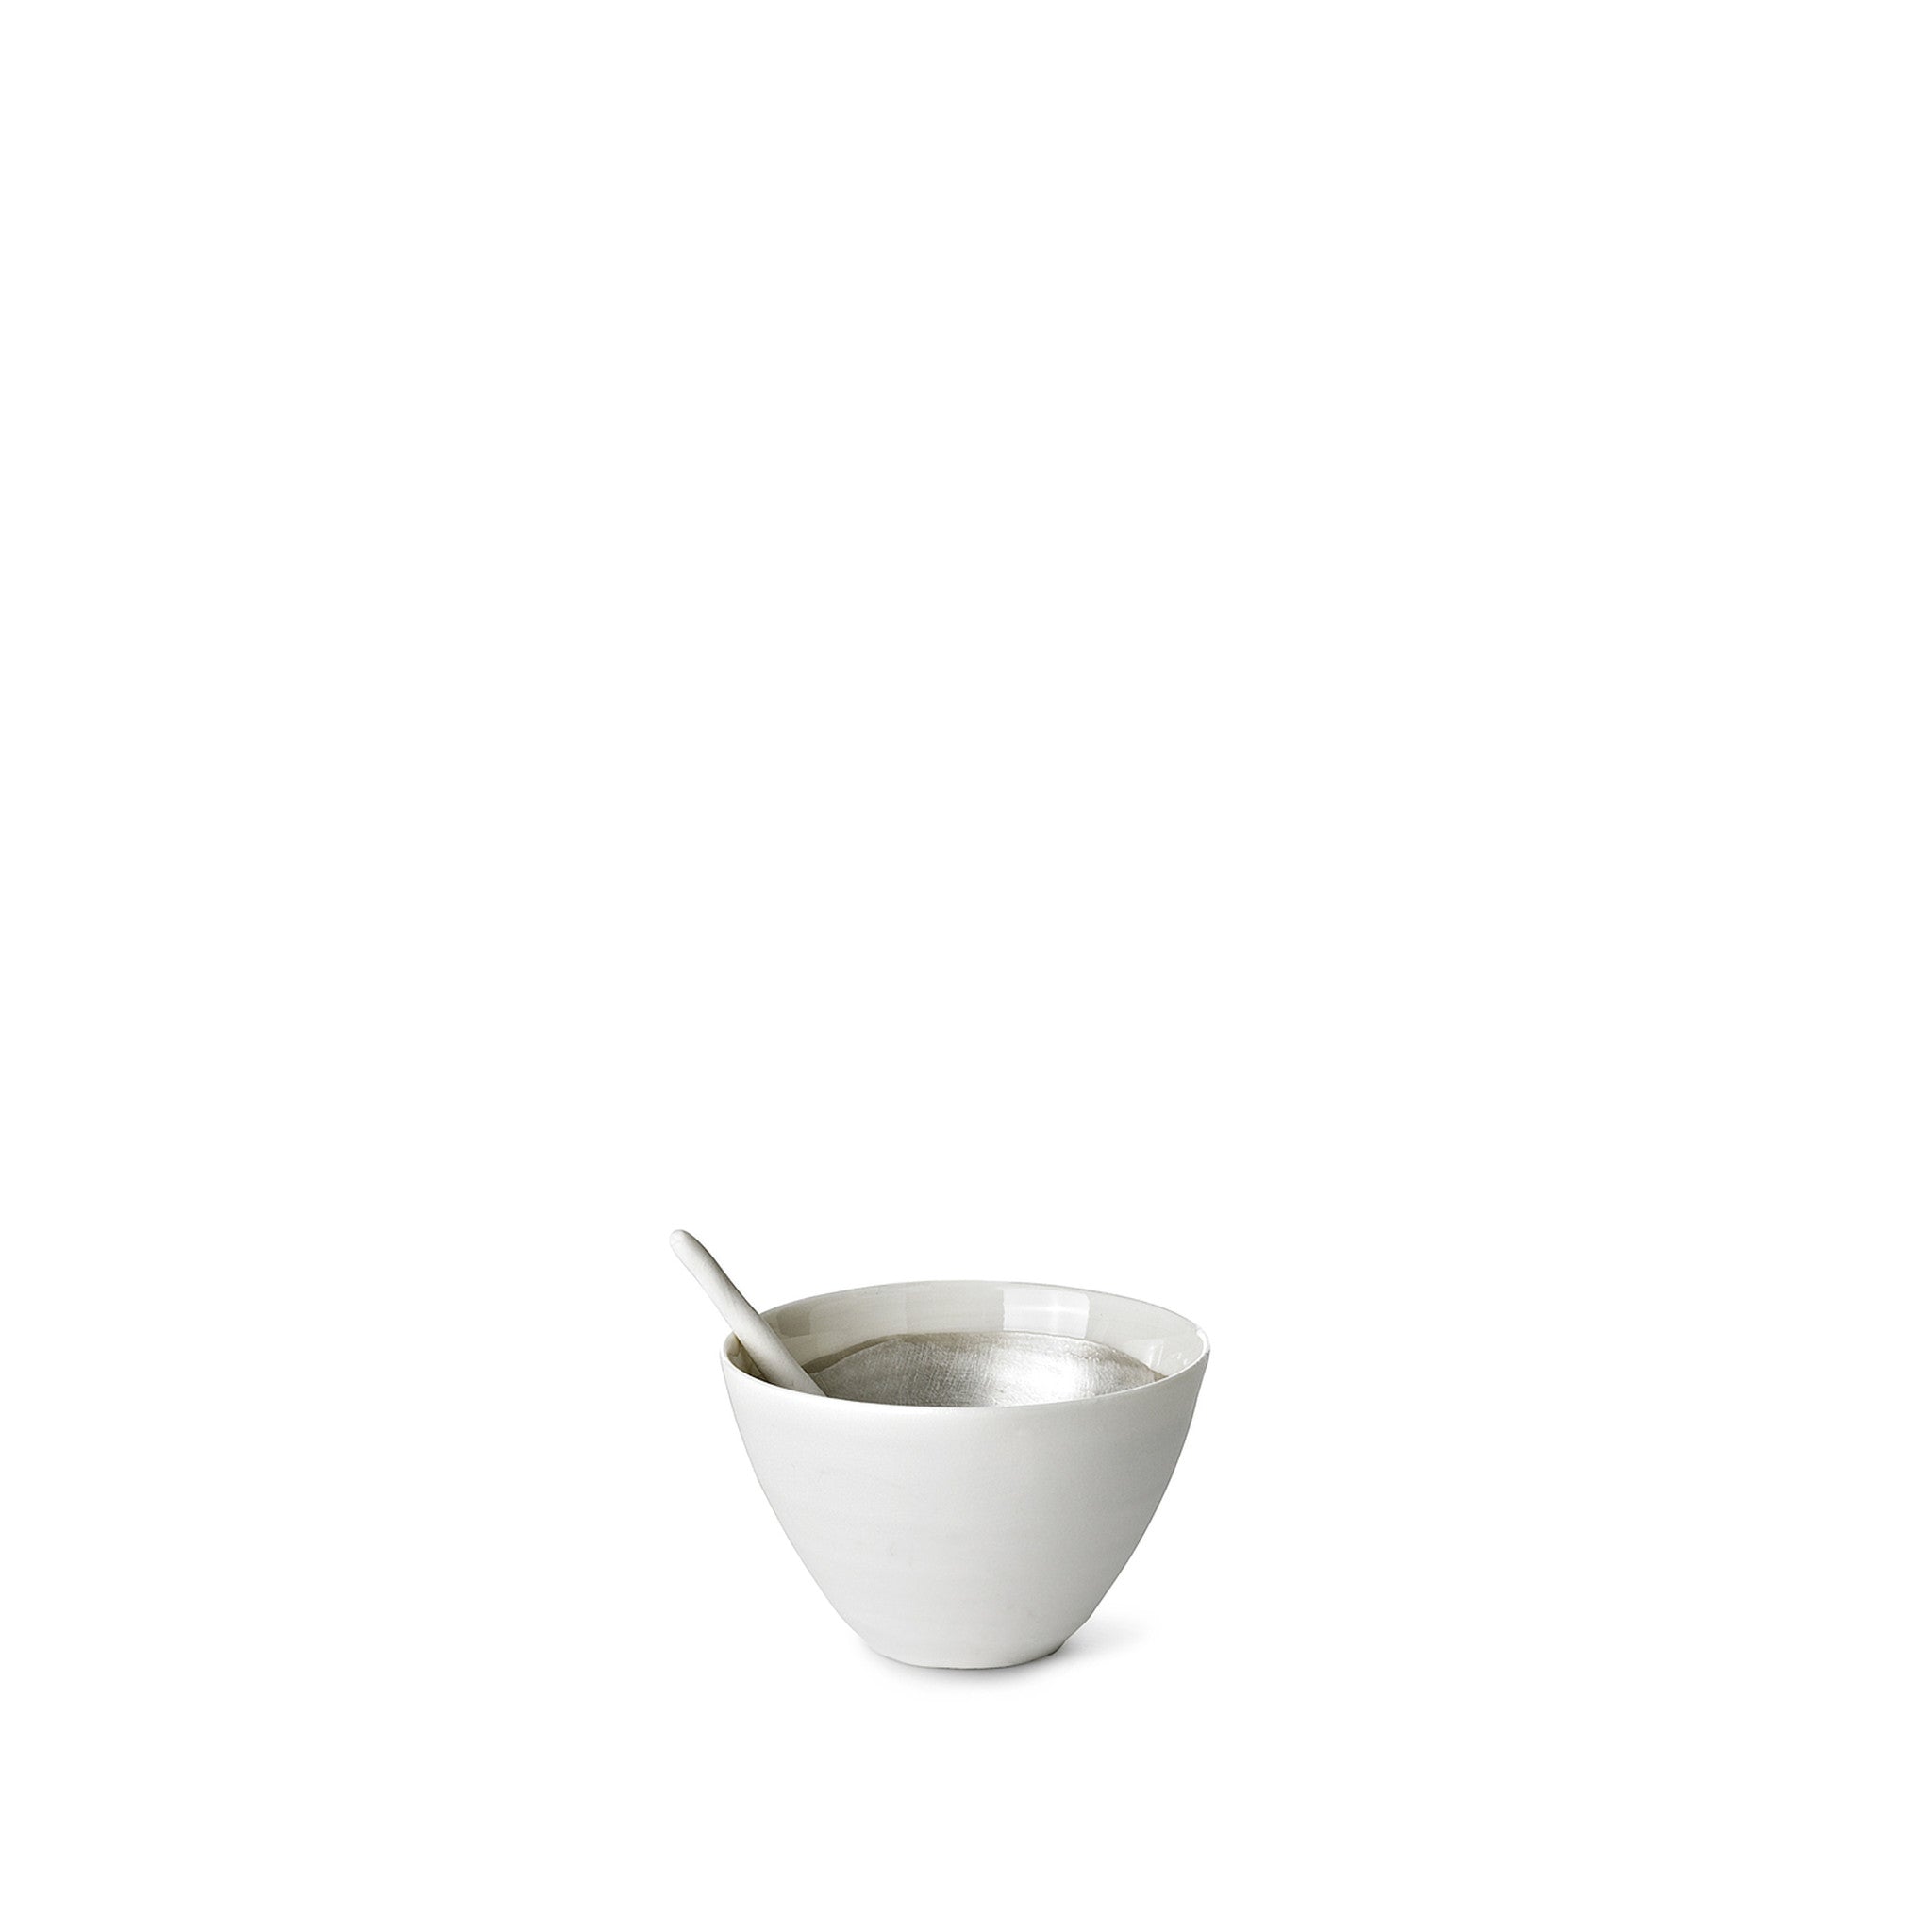 Small Porcelain Bowl with a Matte Silver Interior and Spoon, 6cm